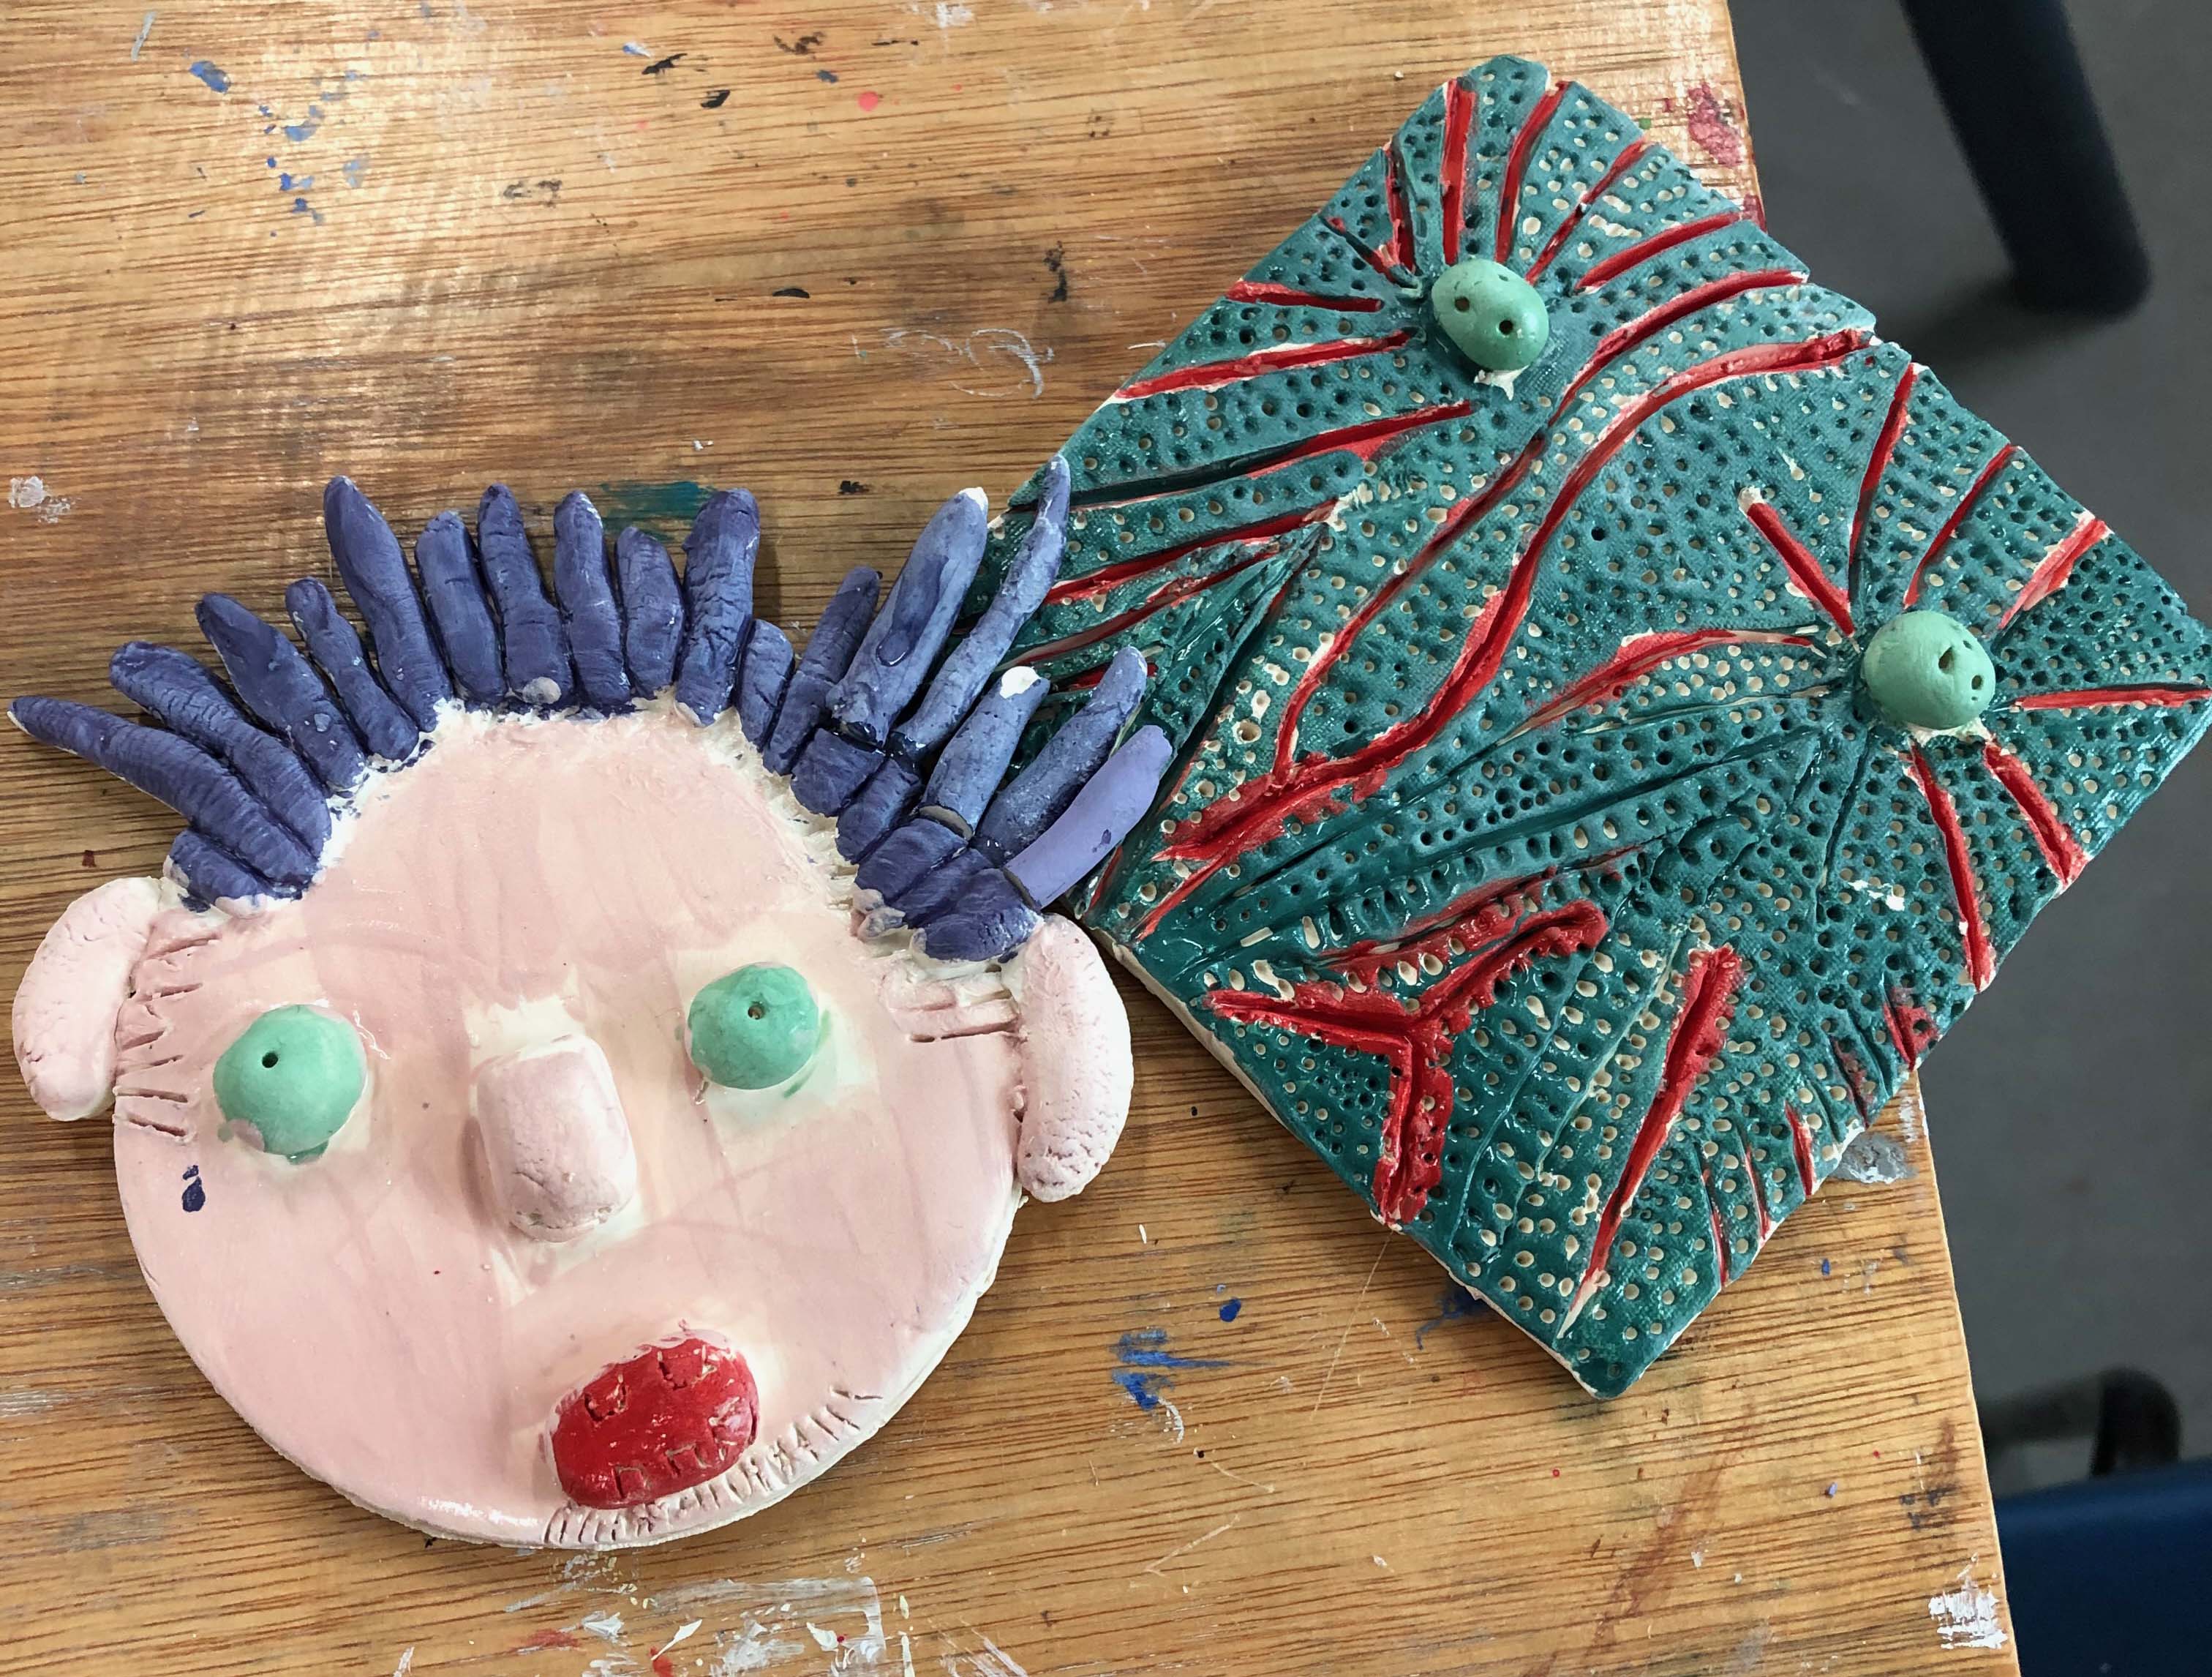 two clay tiles, the left shows a face with blue hair, the right is abstract turquoise and red pattern 